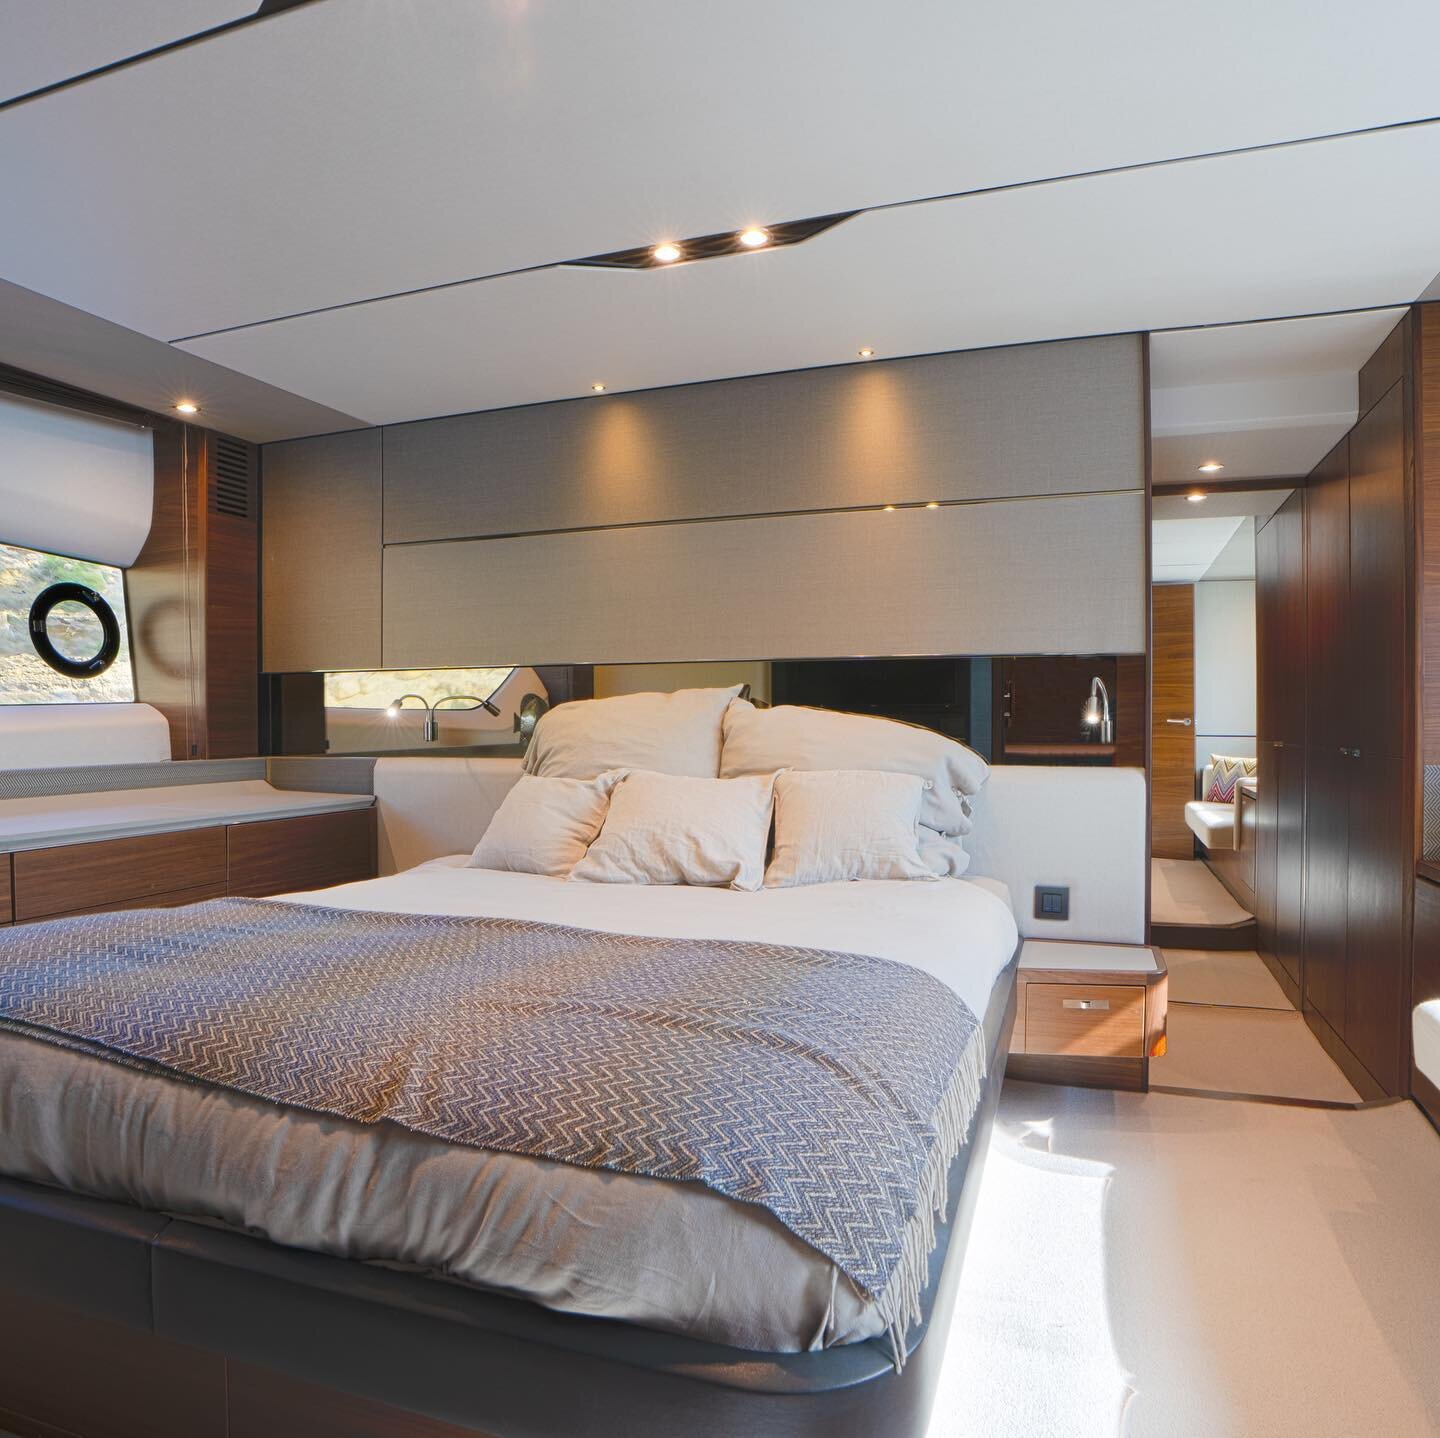 Even with the sleek exterior design, no compromise has been made on the interior of this #princessyachts S65. 

#yachtbroker #yacht #yachting #yachtlife #britishbuilt #forsale #yachtforsale #puertoportals #portalsport #mallorca #yachtlife #yachtdesig